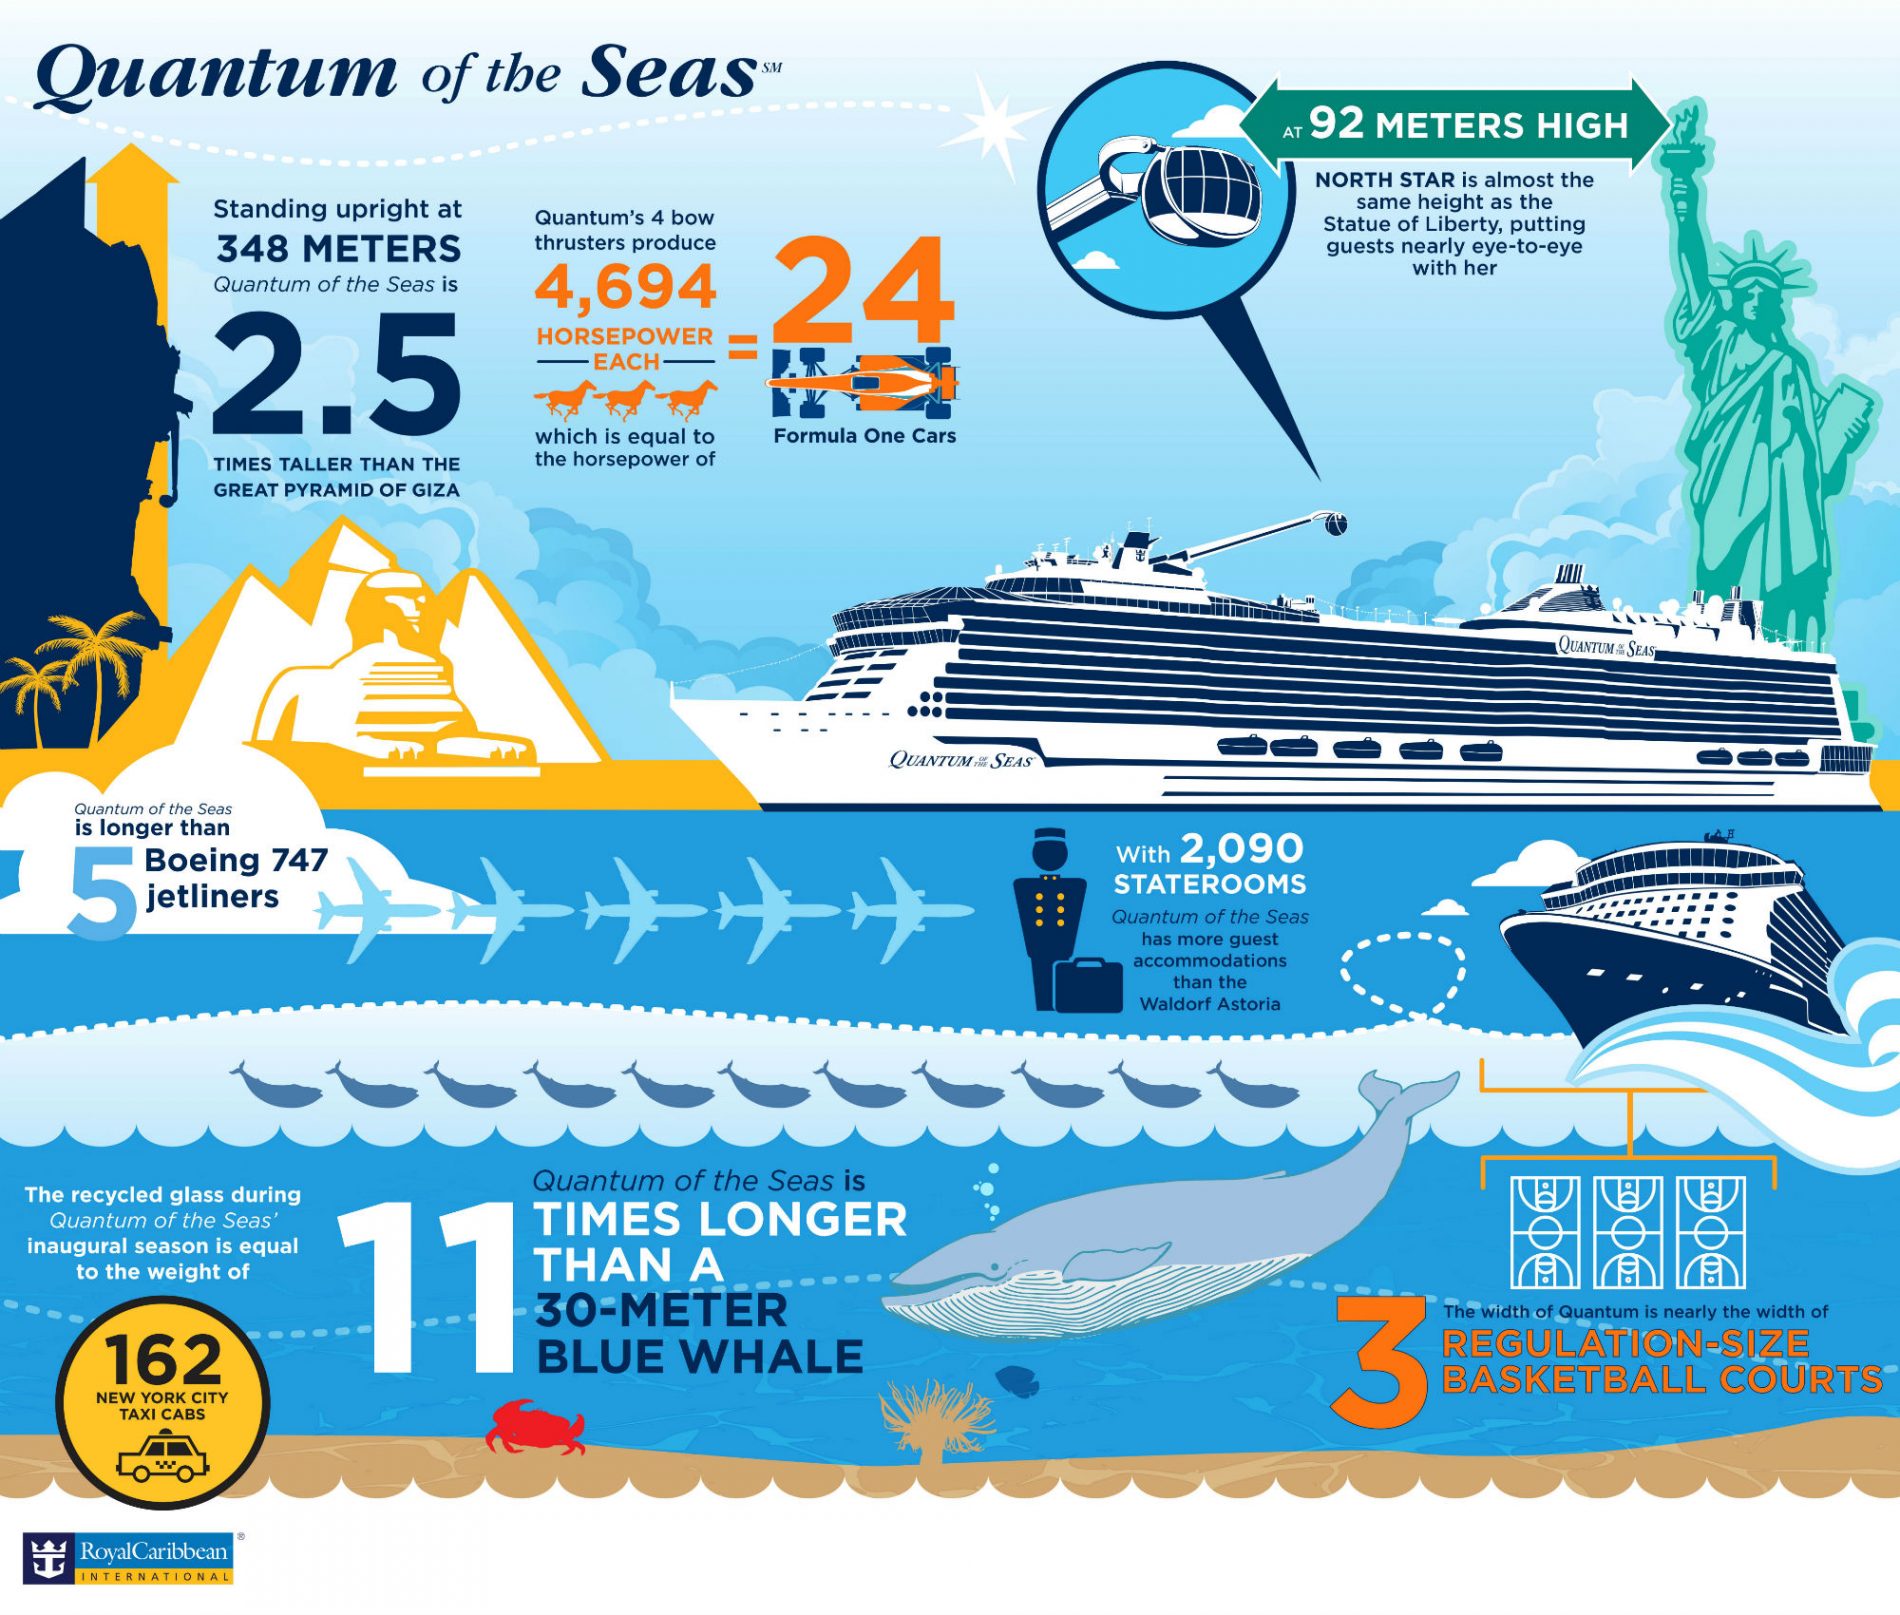 Quantum-of-the-seas-by-the-numbers-2